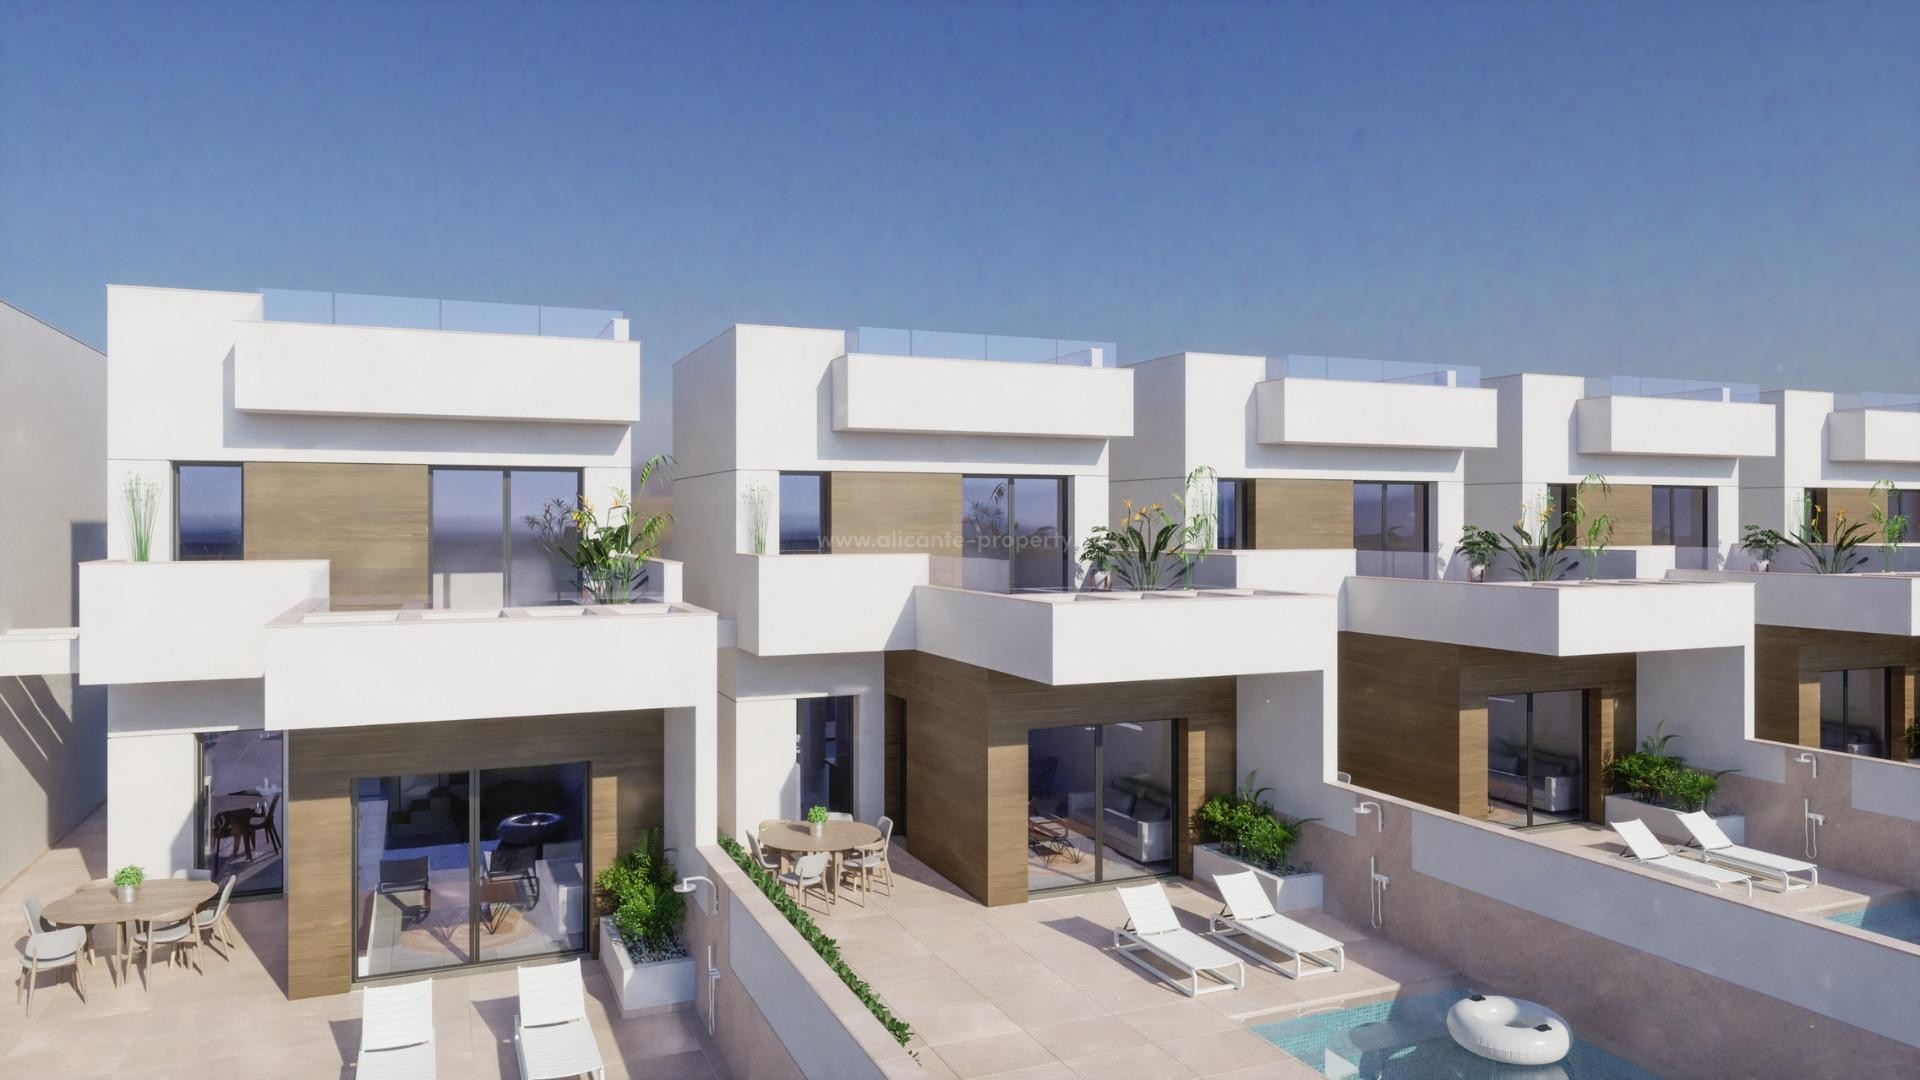 New built villas/houses in Los Montesinos, 3 bedrooms and 3 bathrooms, nice private garden with pool, solarium with fantastic views. 10 minutes from beaches